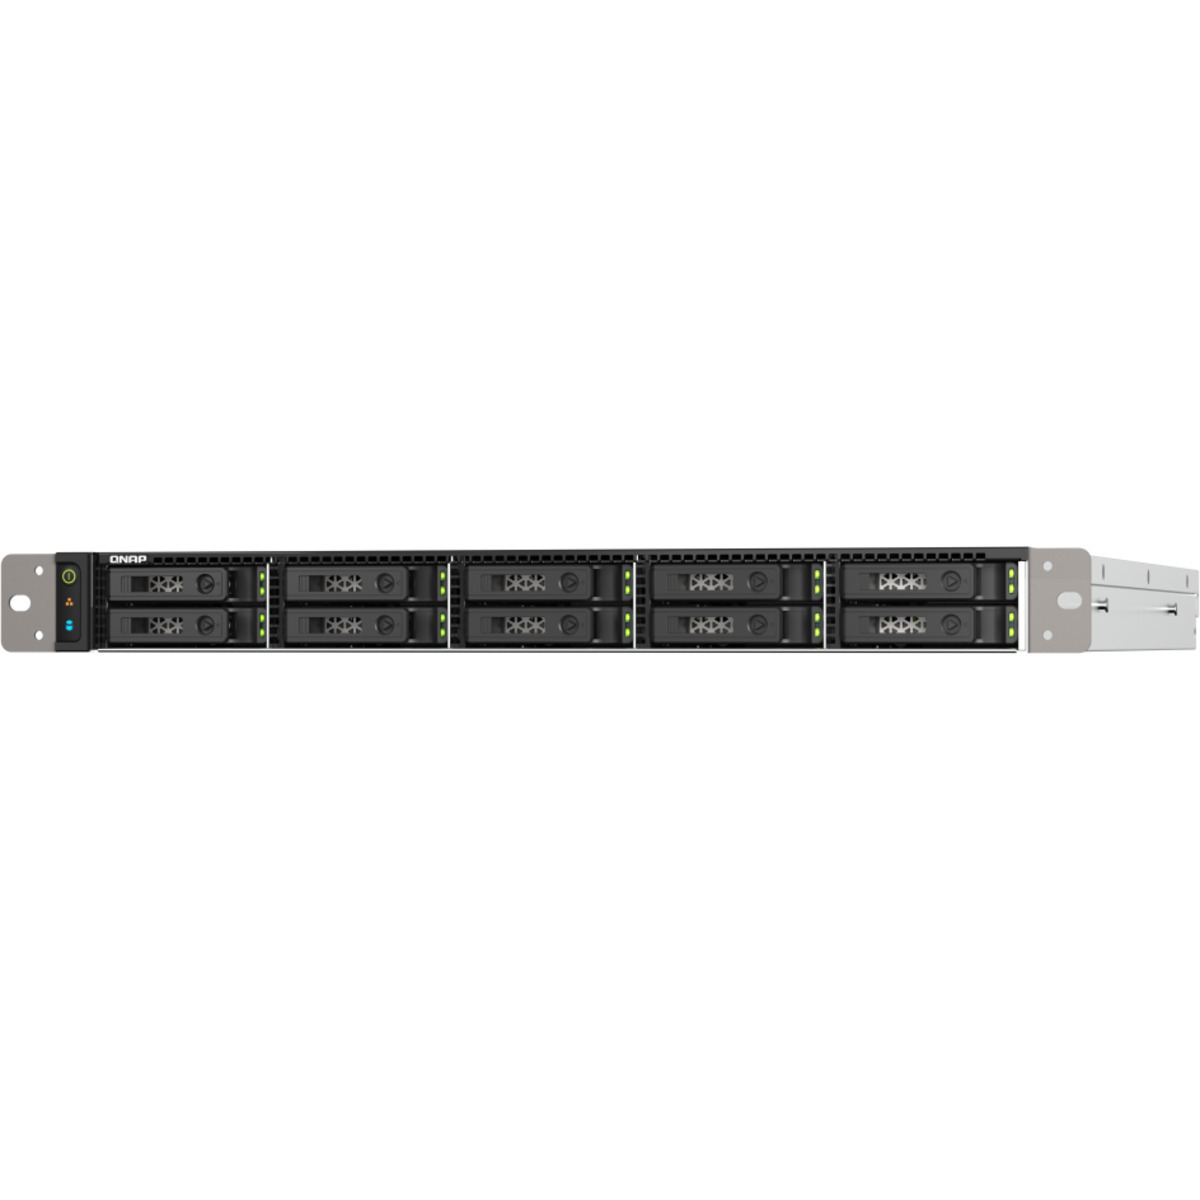 QNAP TS-h1090FU-7302P 8tb 10-Bay RackMount Large Business / Enterprise NAS - Network Attached Storage Device 8x1tb Crucial MX500 CT1000MX500SSD1 2.5 560/510MB/s SATA 6Gb/s SSD CONSUMER Class Drives Installed - Burn-In Tested TS-h1090FU-7302P